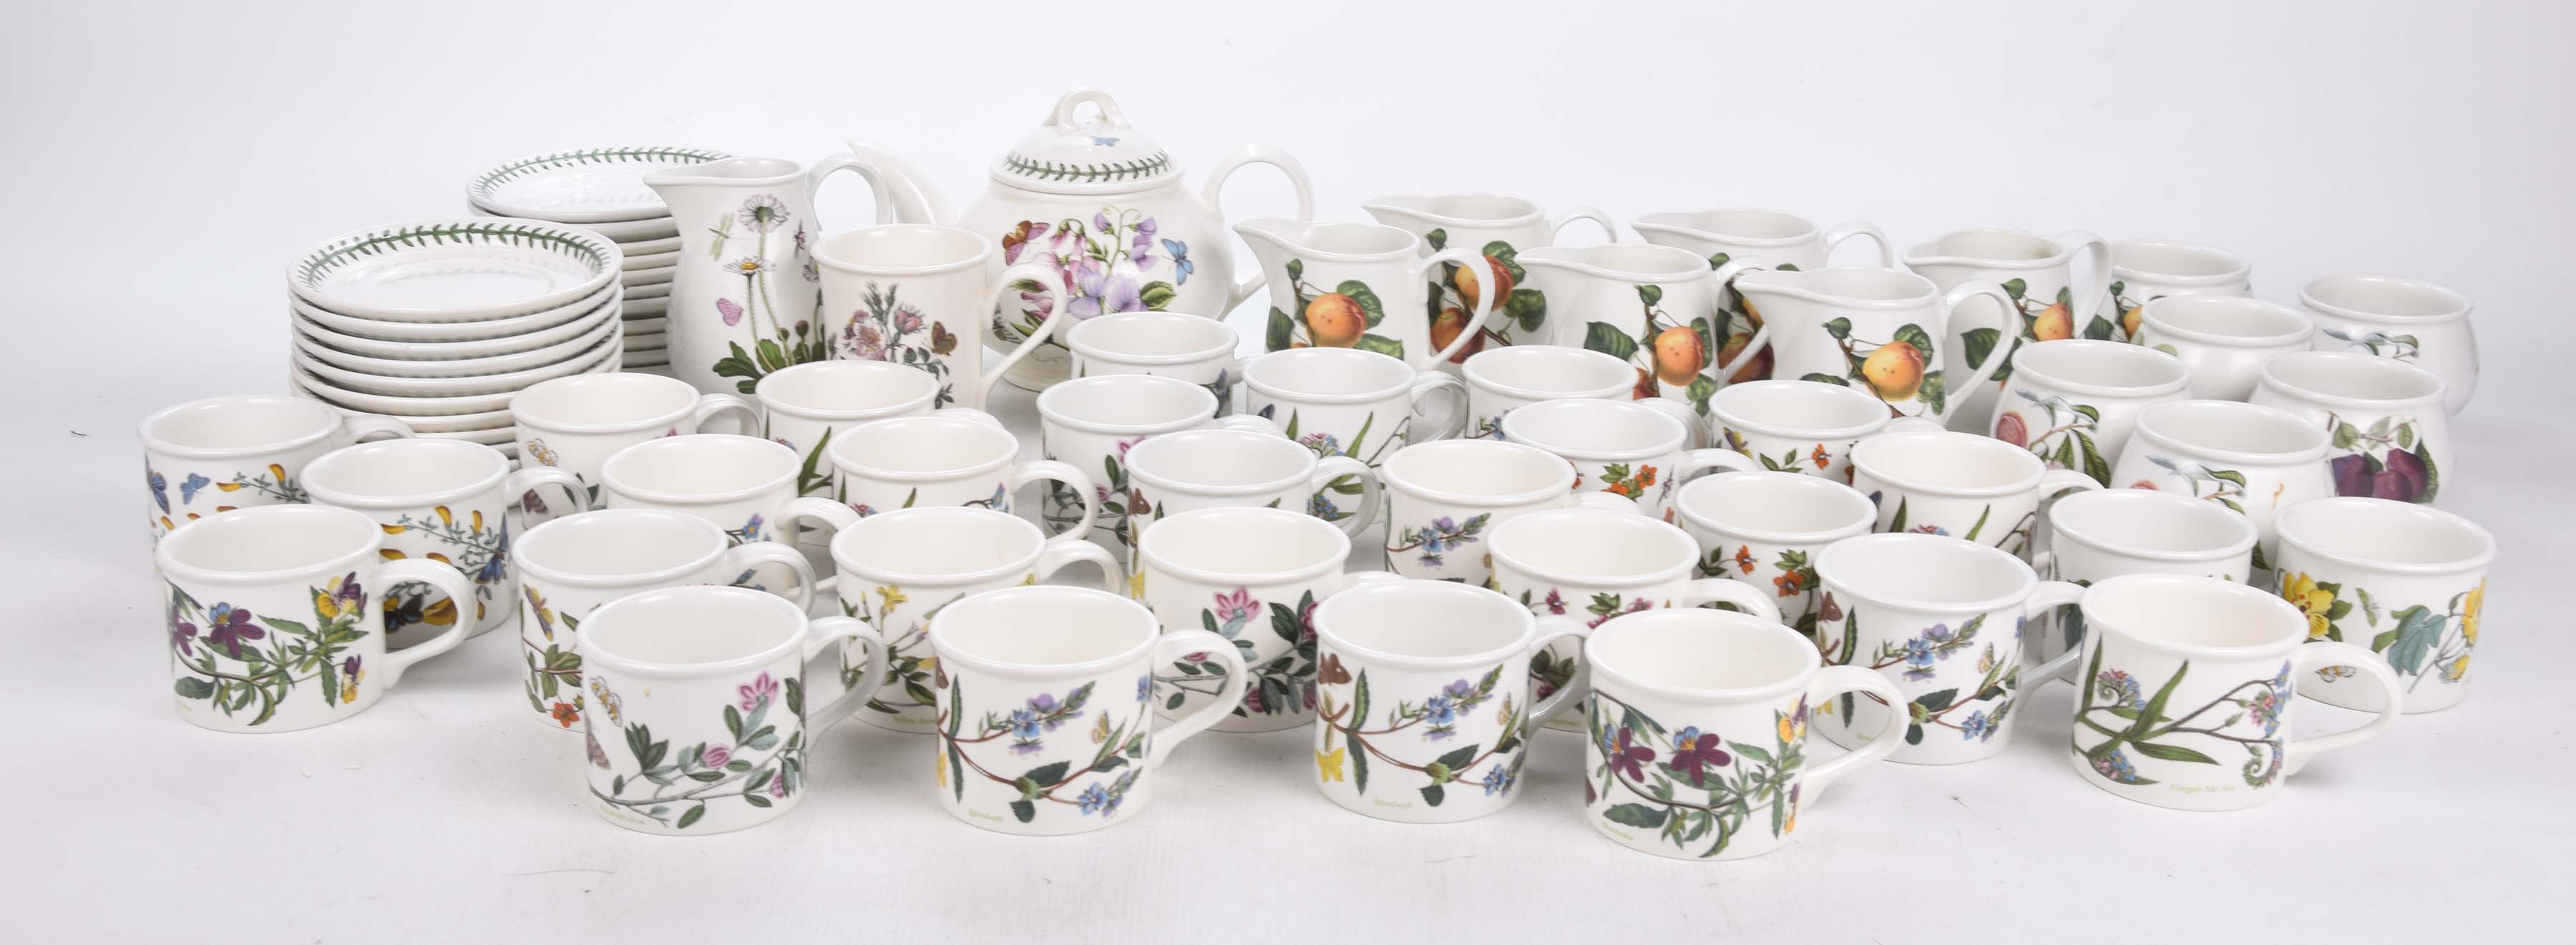 A large collection of Portmeirion Botanic Garden cups and saucers Along with a teapot and various